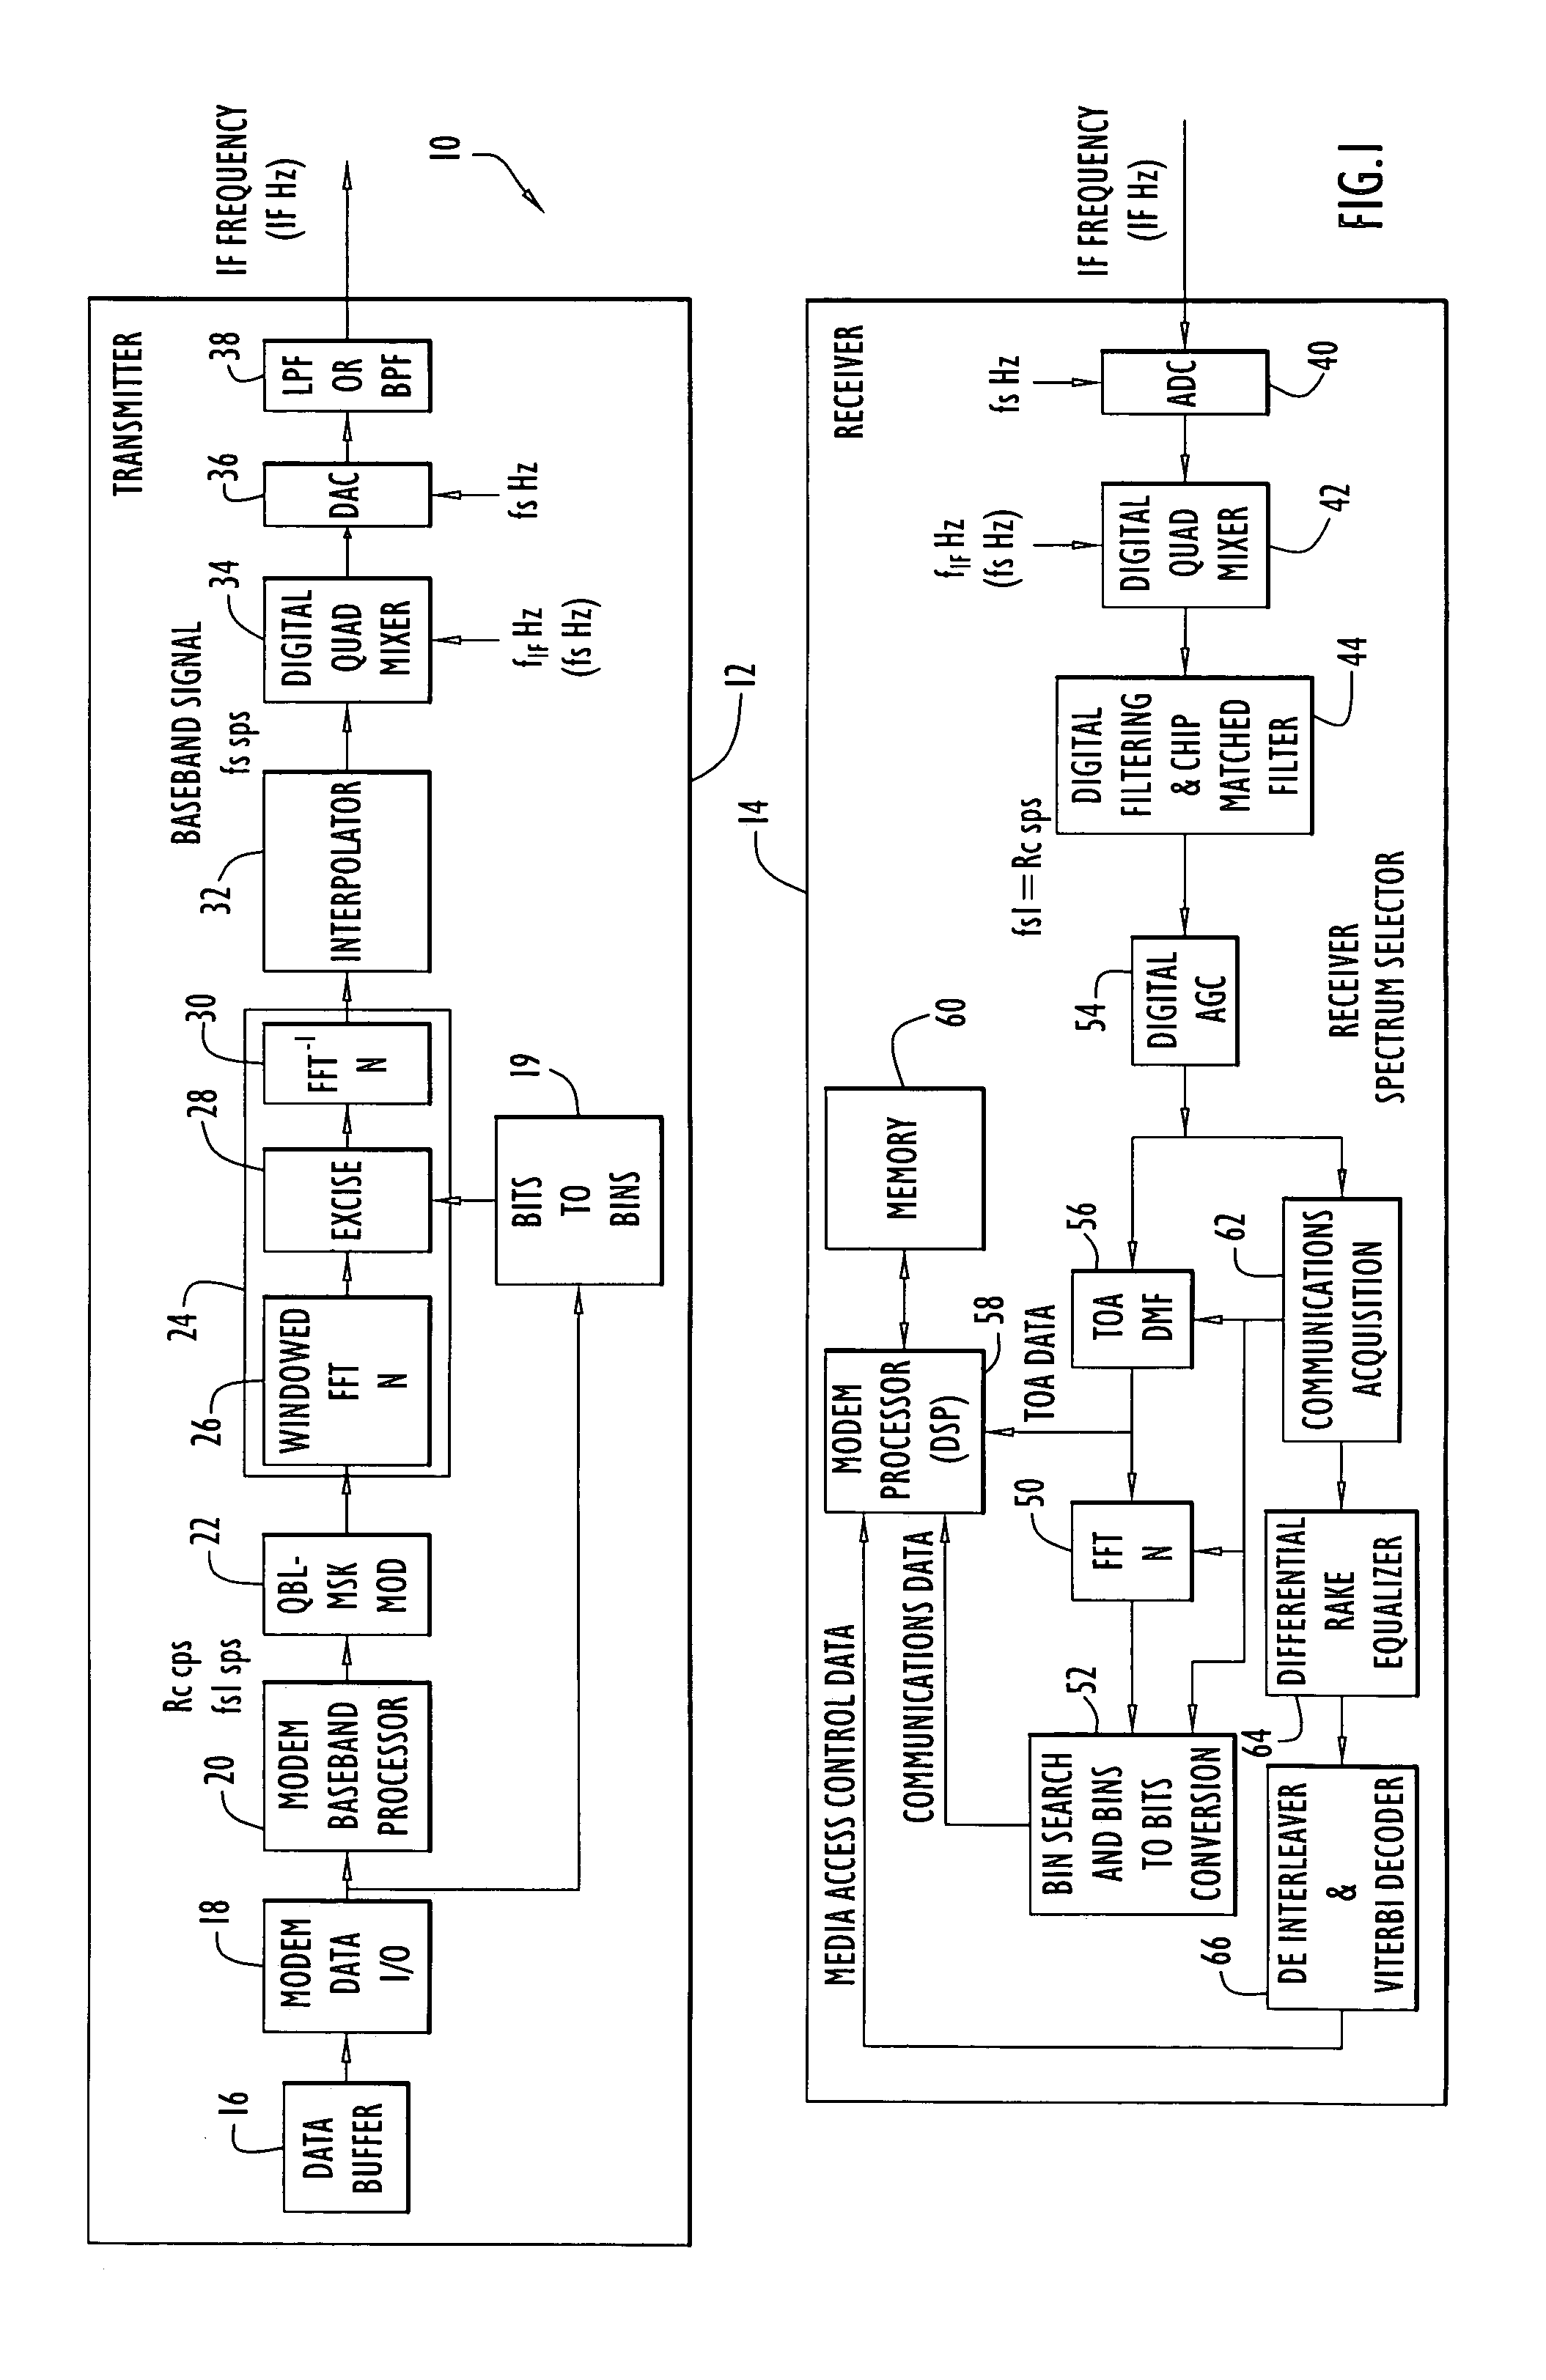 Methods and apparatus for encoding information in a signal by spectral notch modulation